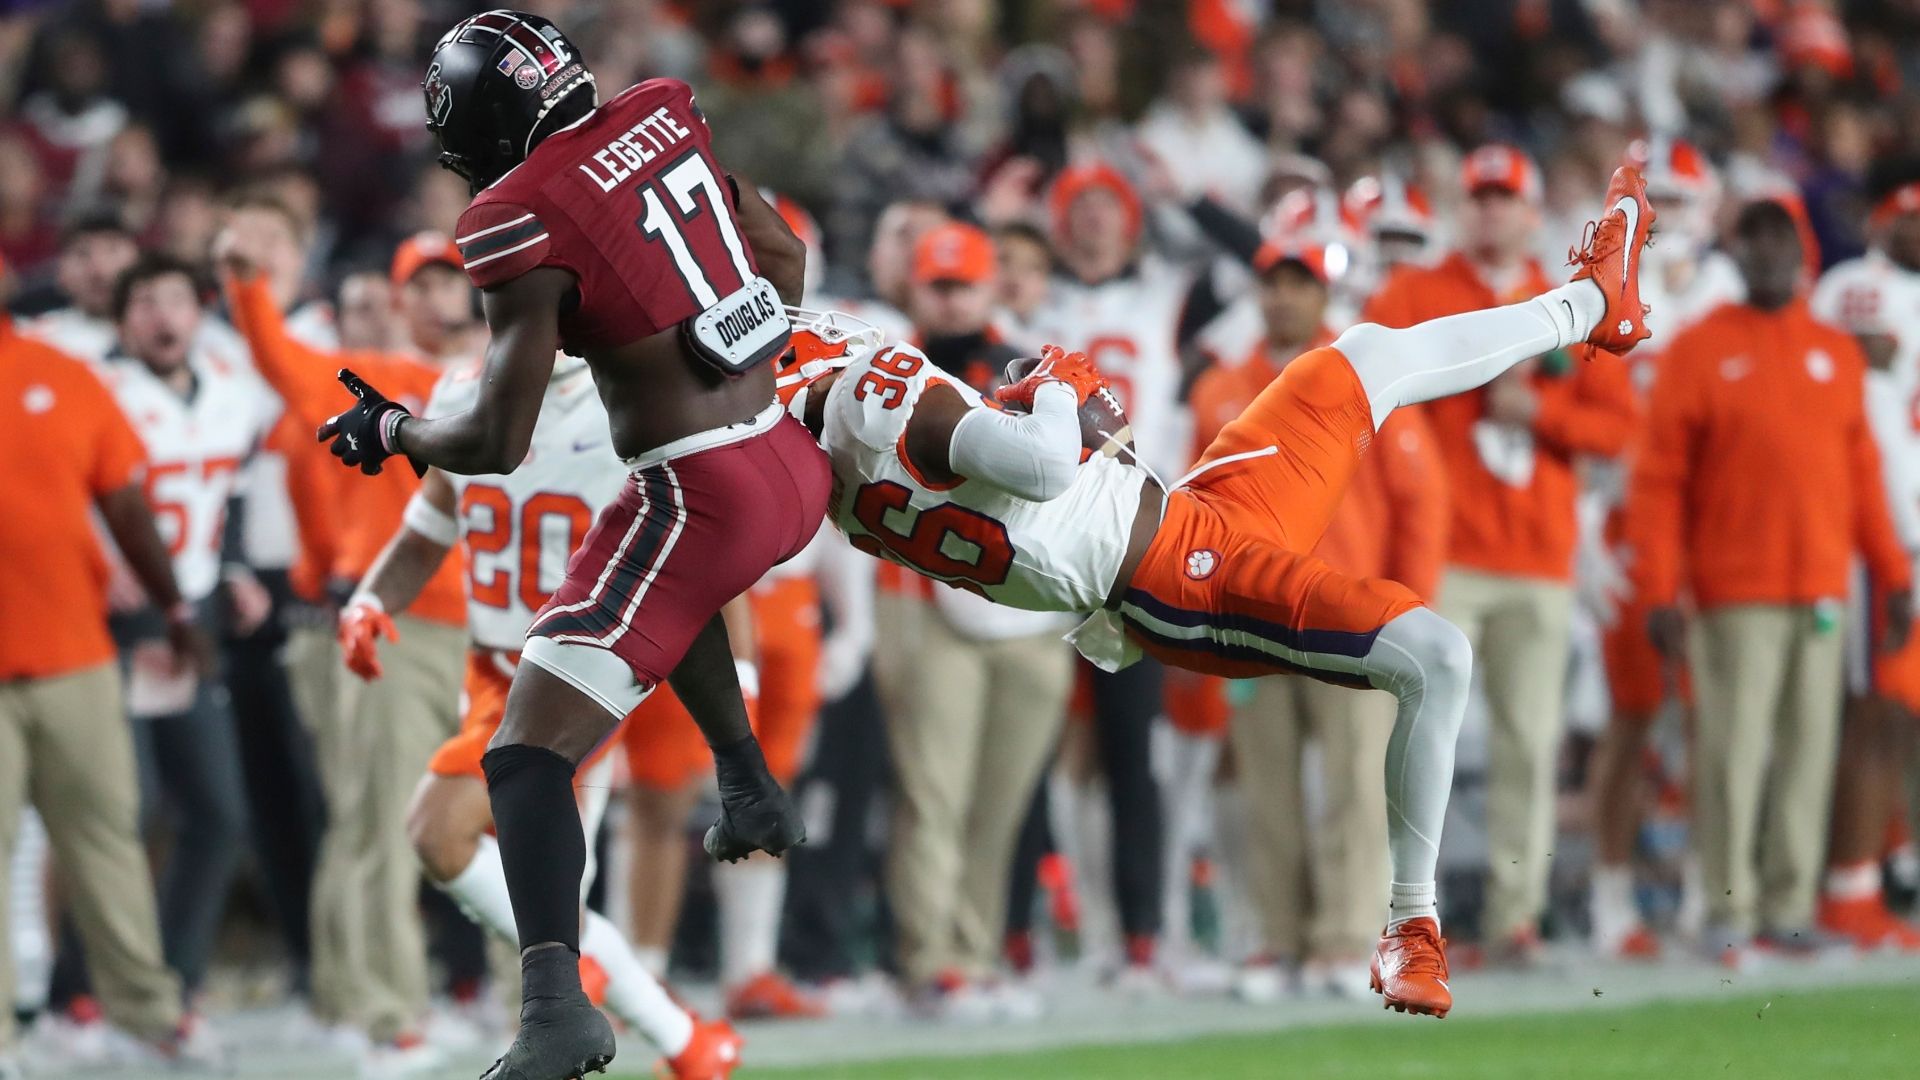 Clemson grinds out gritty win over South Carolina